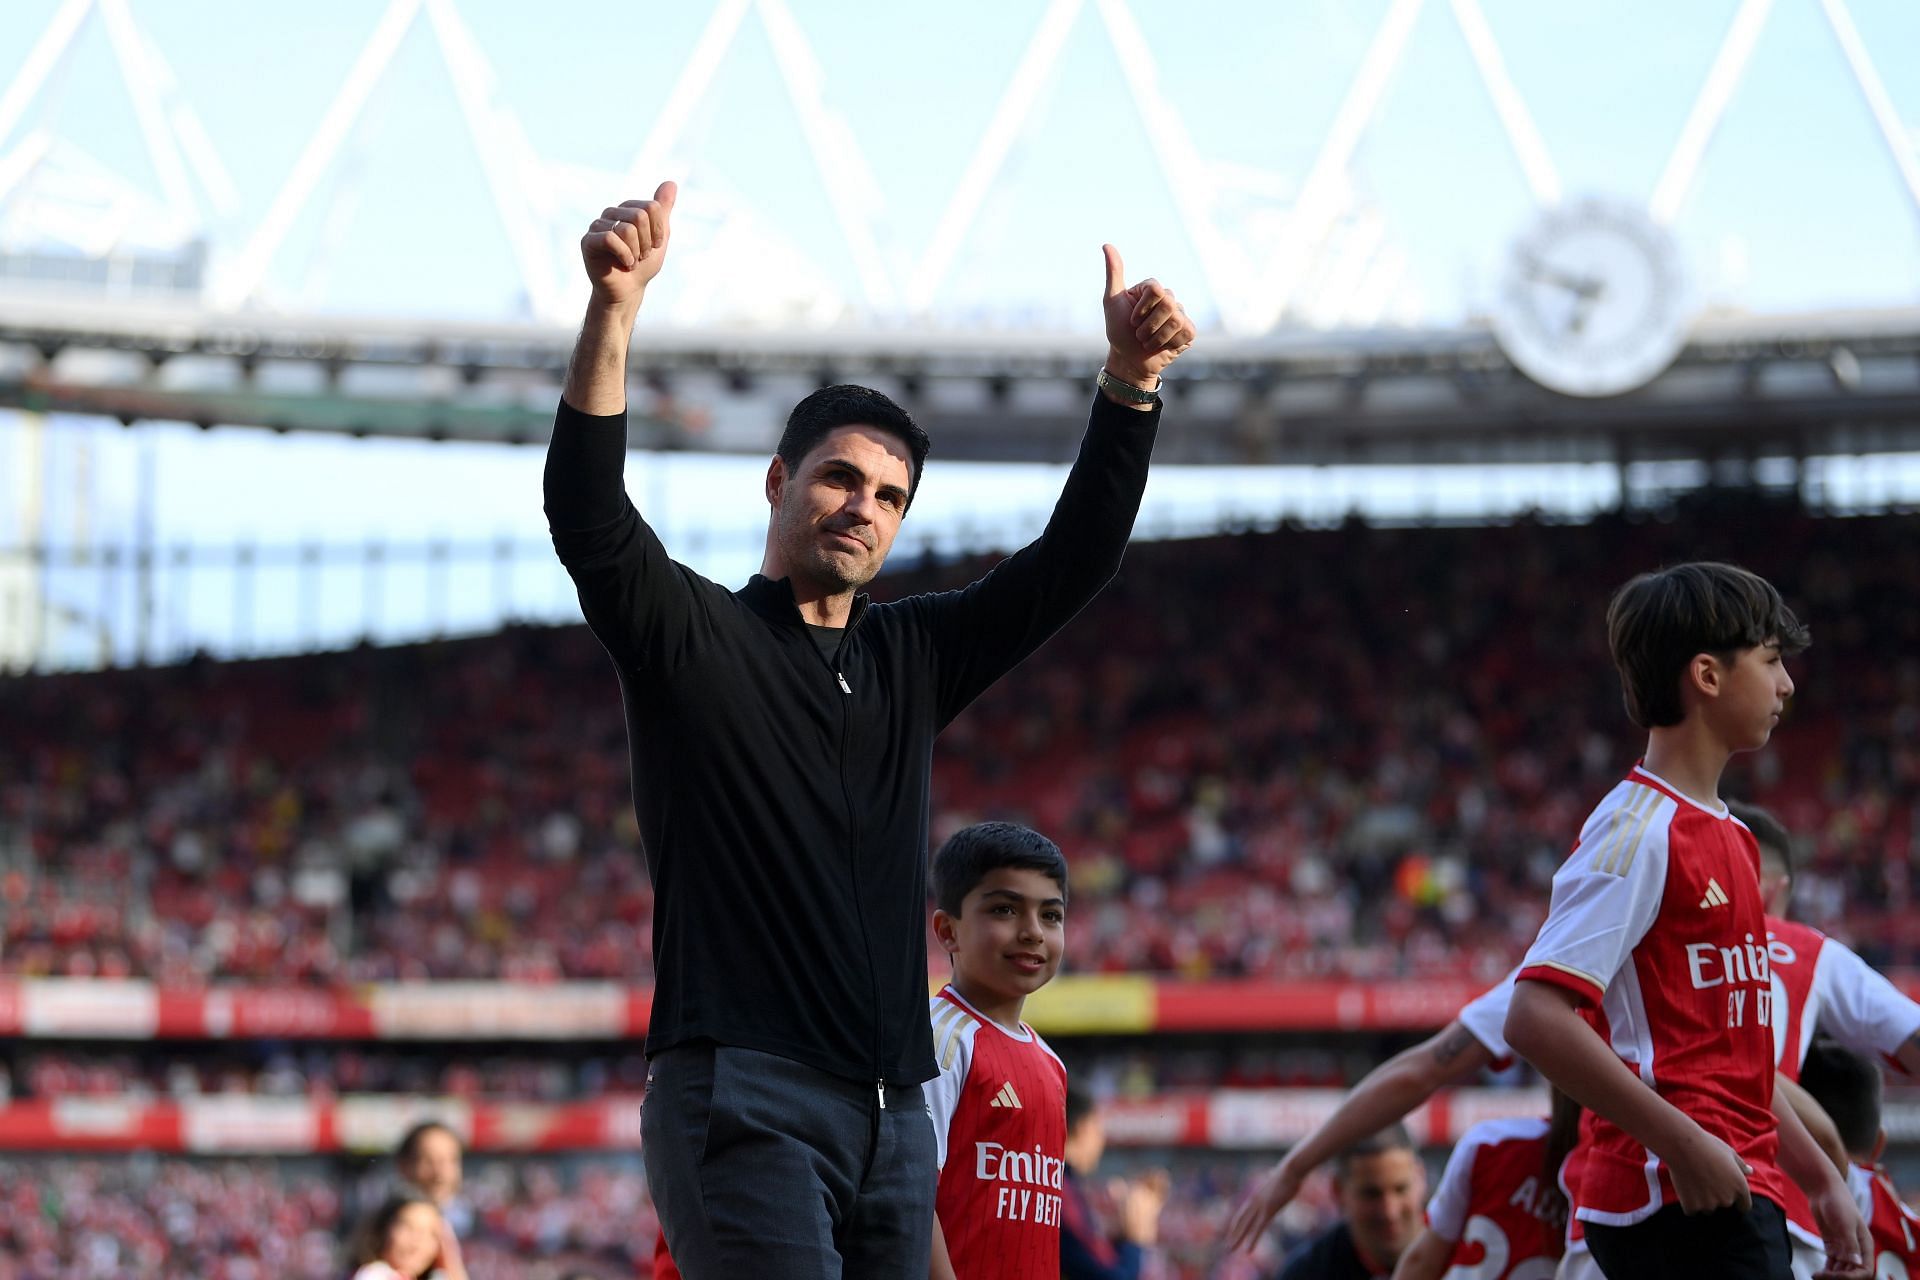 Mikel Arteta has reignited the Gunners into title challengers.